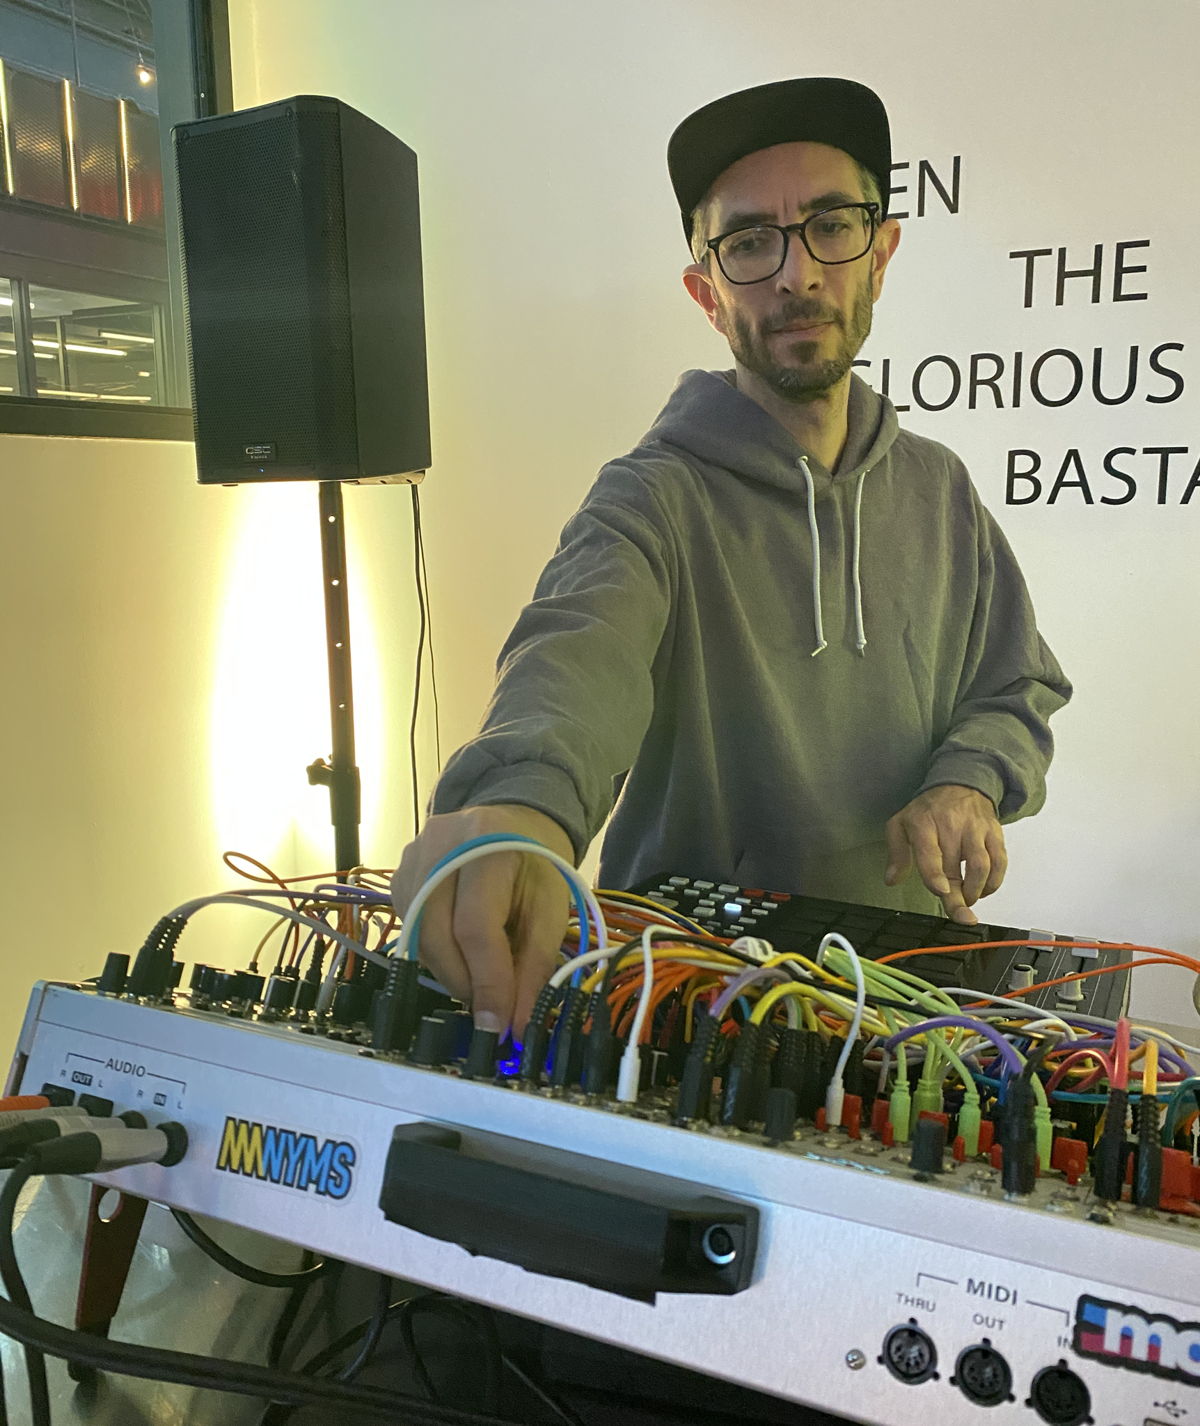 Electronic artist and New York Modular Society co-founder Ben The Glorious Bastard performs live with integrated Eurorack setup